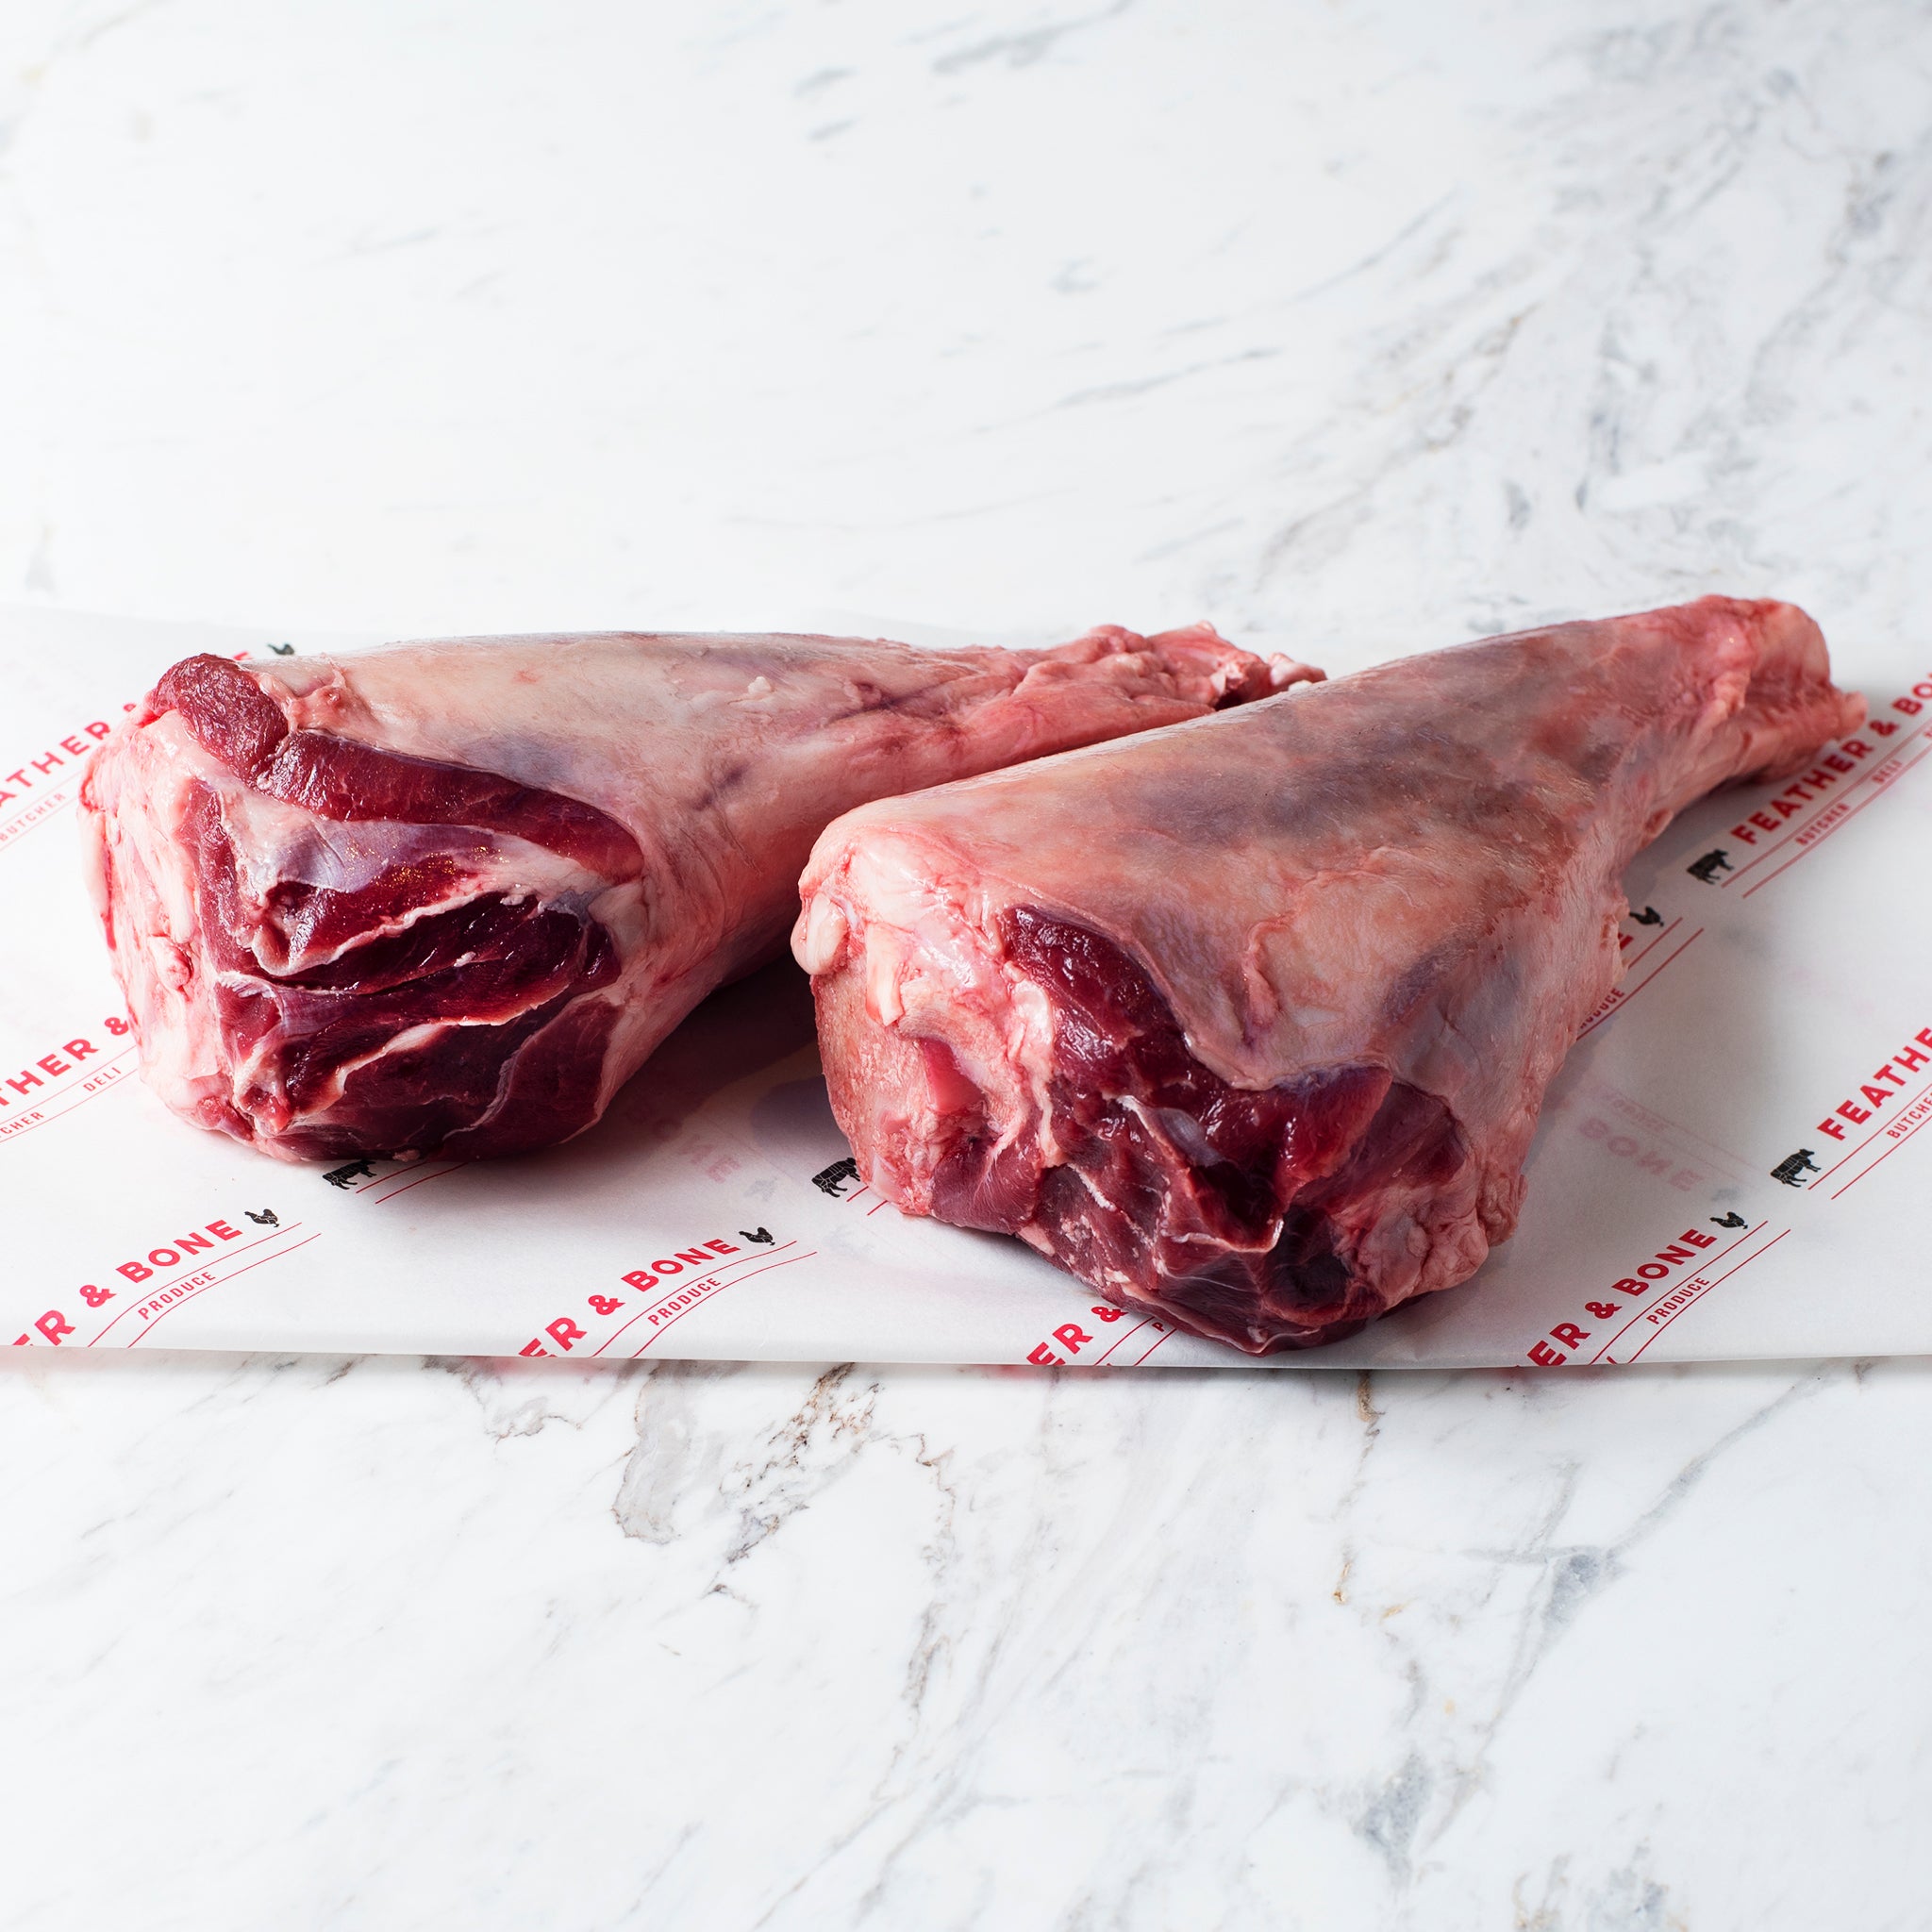 Two lamb shanks on a marble slab.